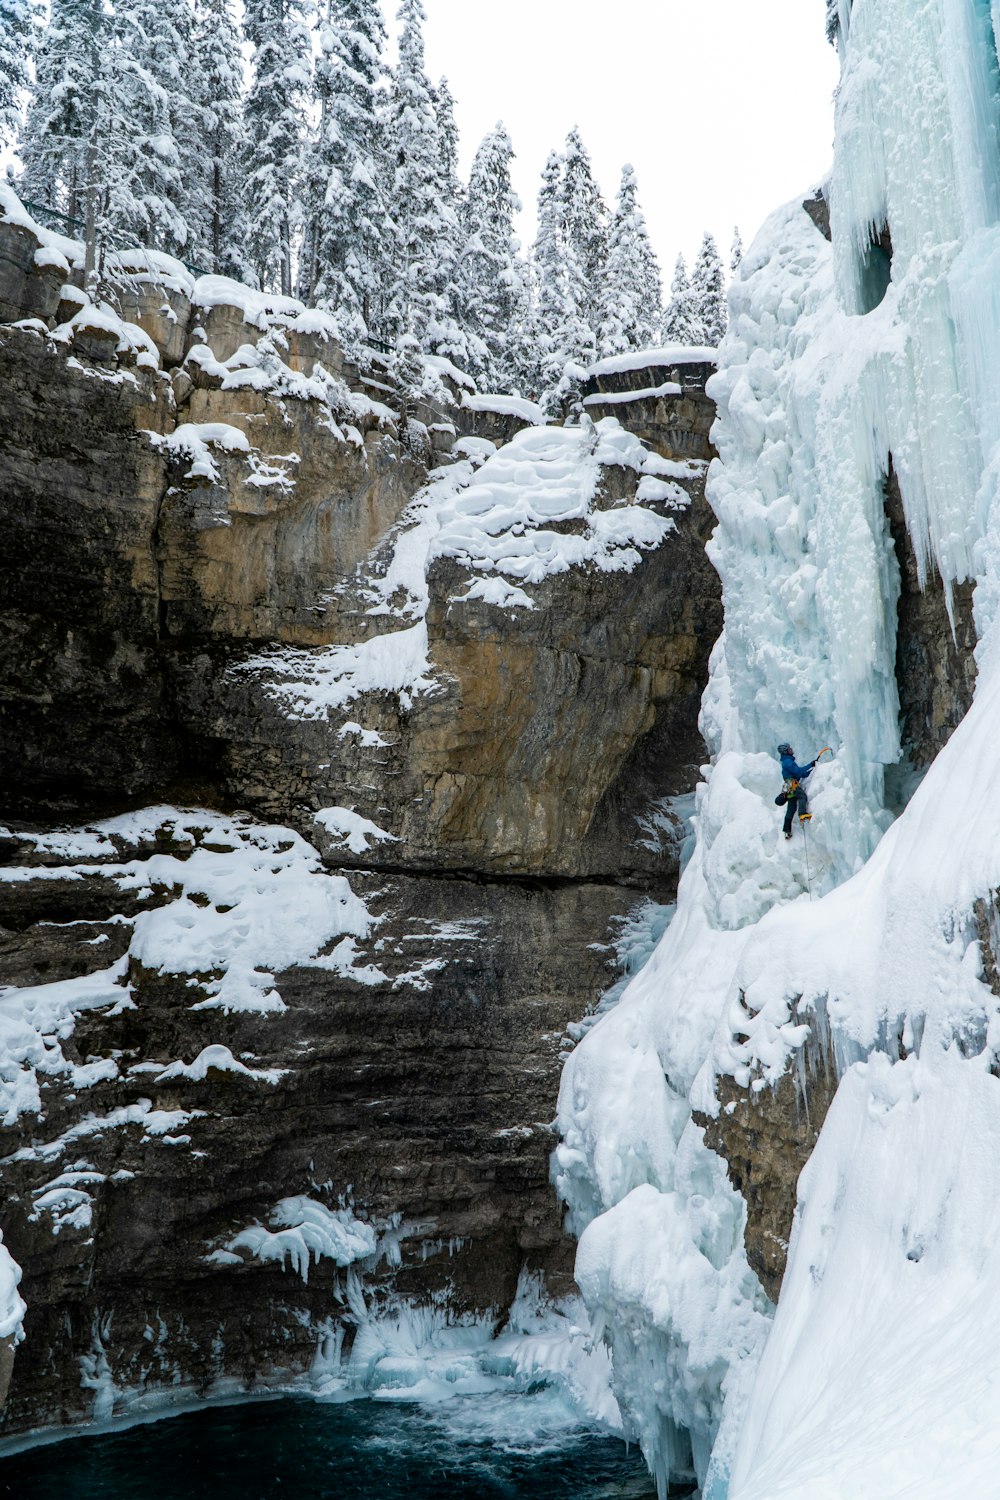 a person climbing up a snowy cliff next to a waterfall